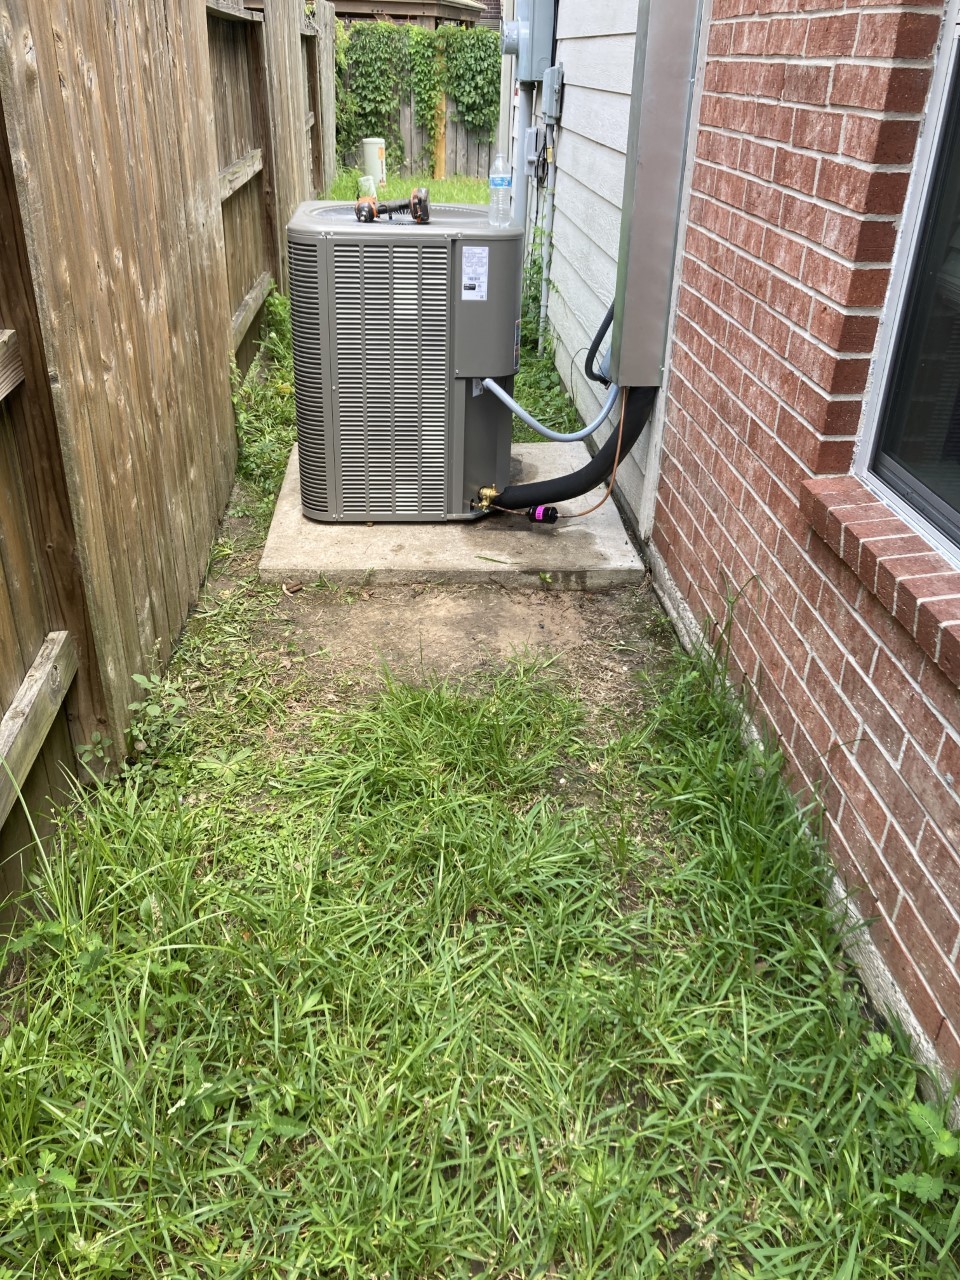 Residential Air Conditioning Unit